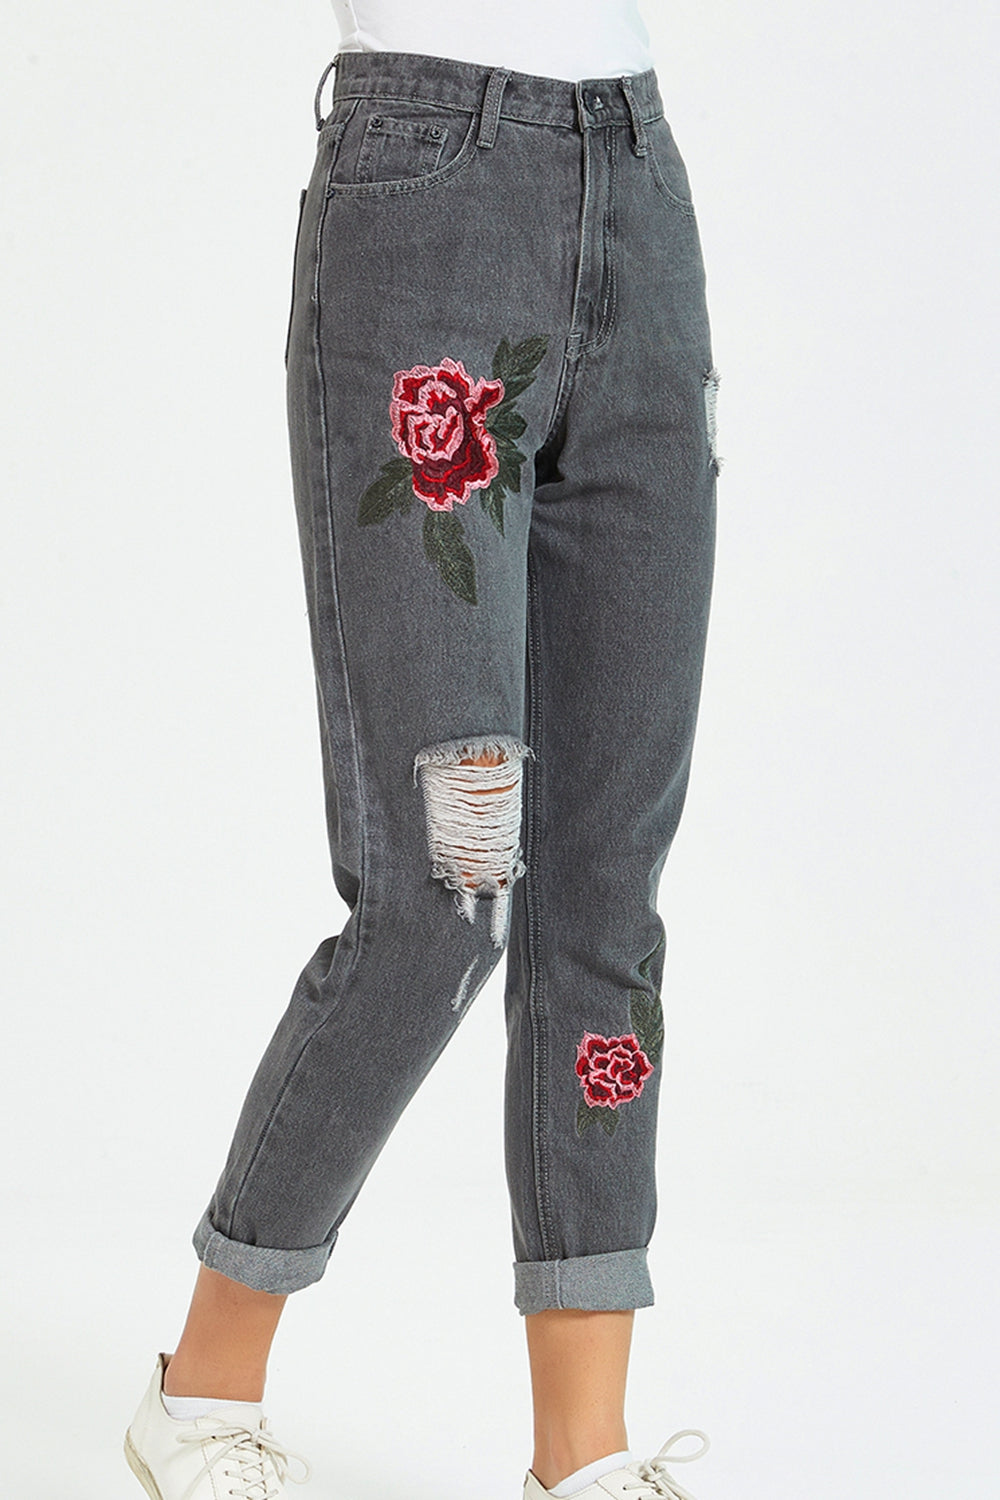 Dim Gray Flower Embroidery Distressed Jeans Sentient Beauty Fashions Apparel &amp; Accessories